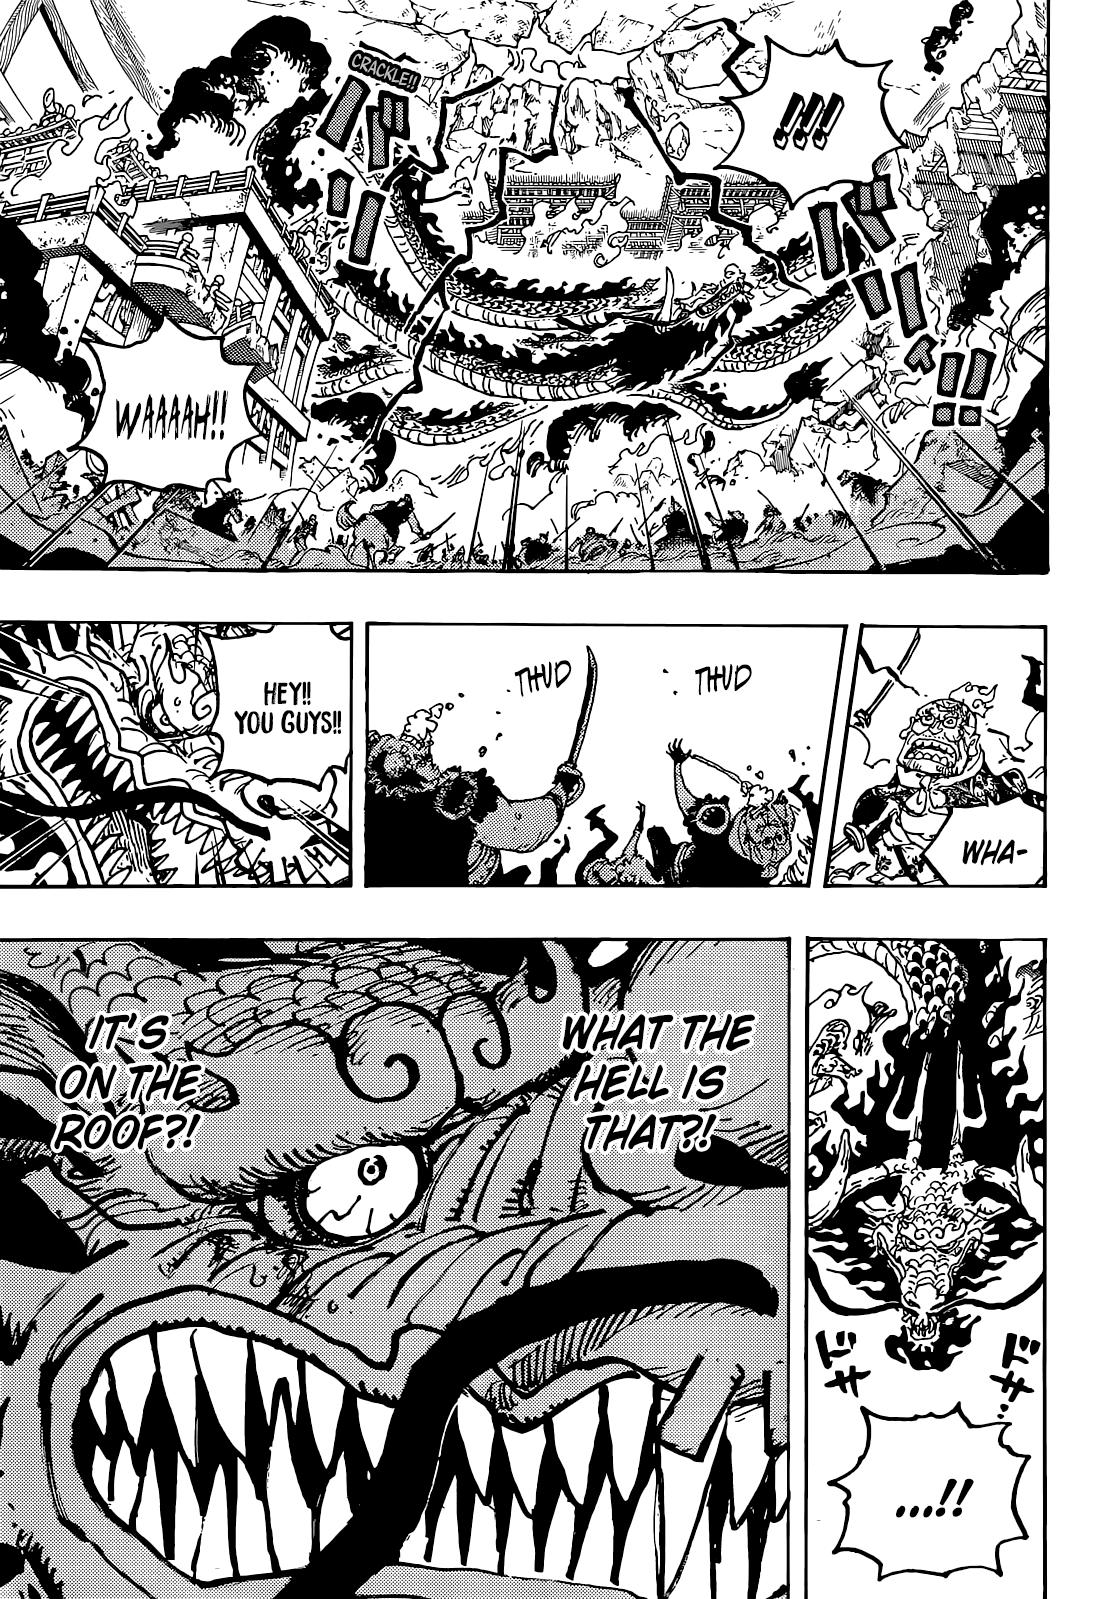 One Piece Chapter 1044 Readover #onepiece1044 #onepiecereadover #onepi